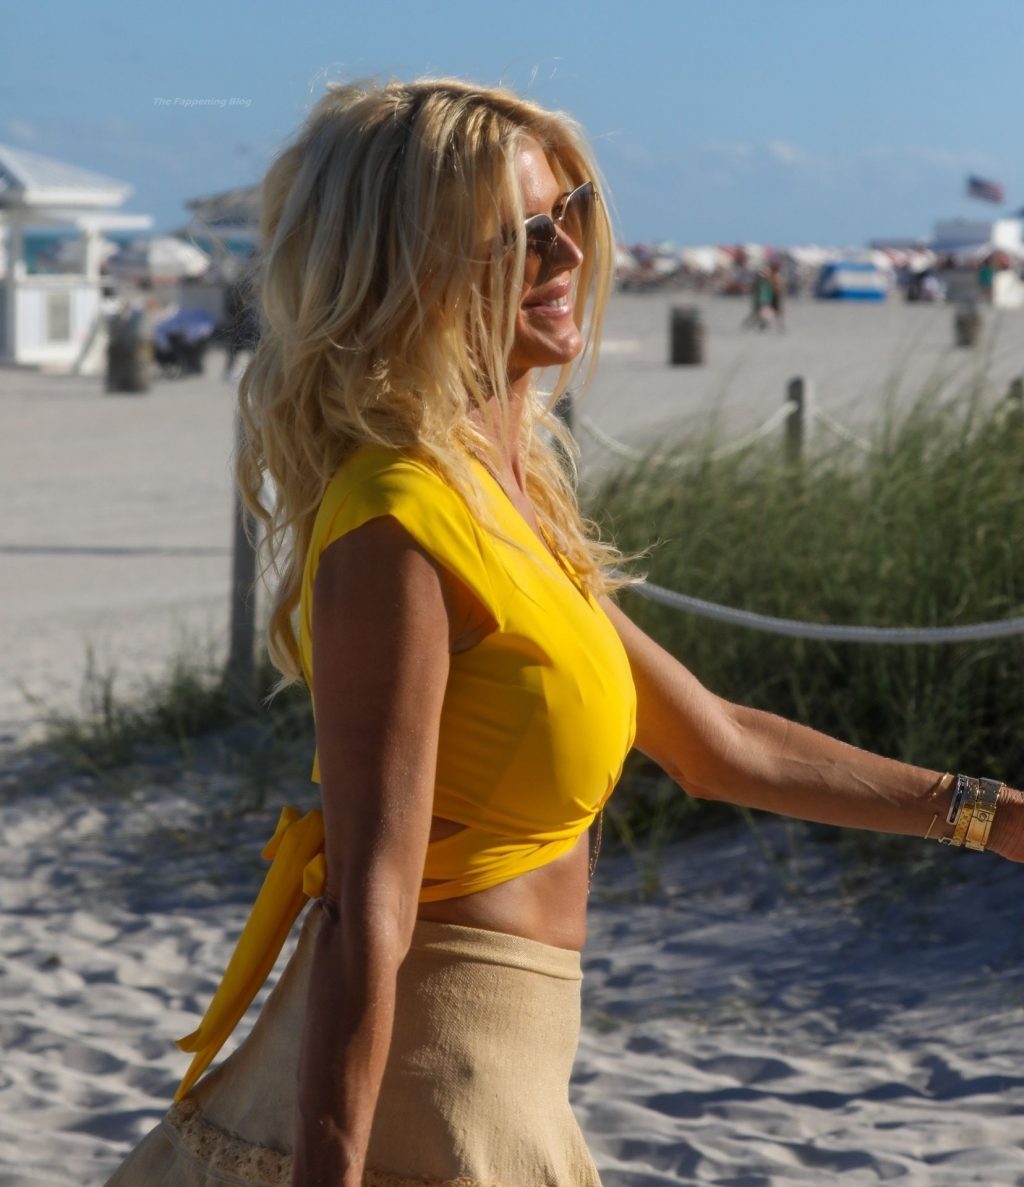 Victoria Silvstedt Flaunts Her Sensational Model Frame in Miami (32 Photos)